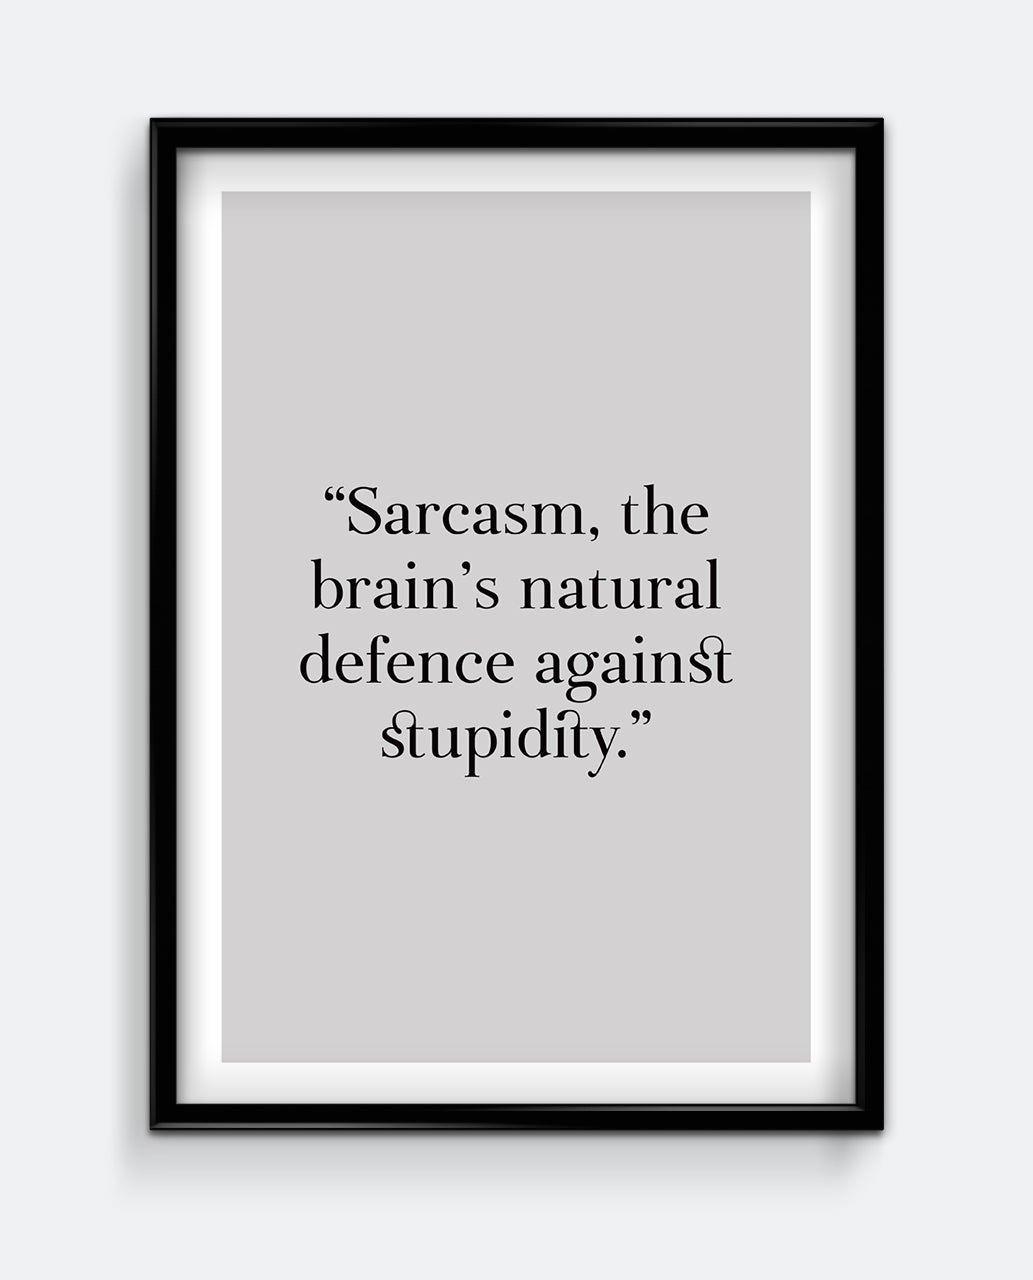 Sarcasm, the brain's natural defence against stupidity